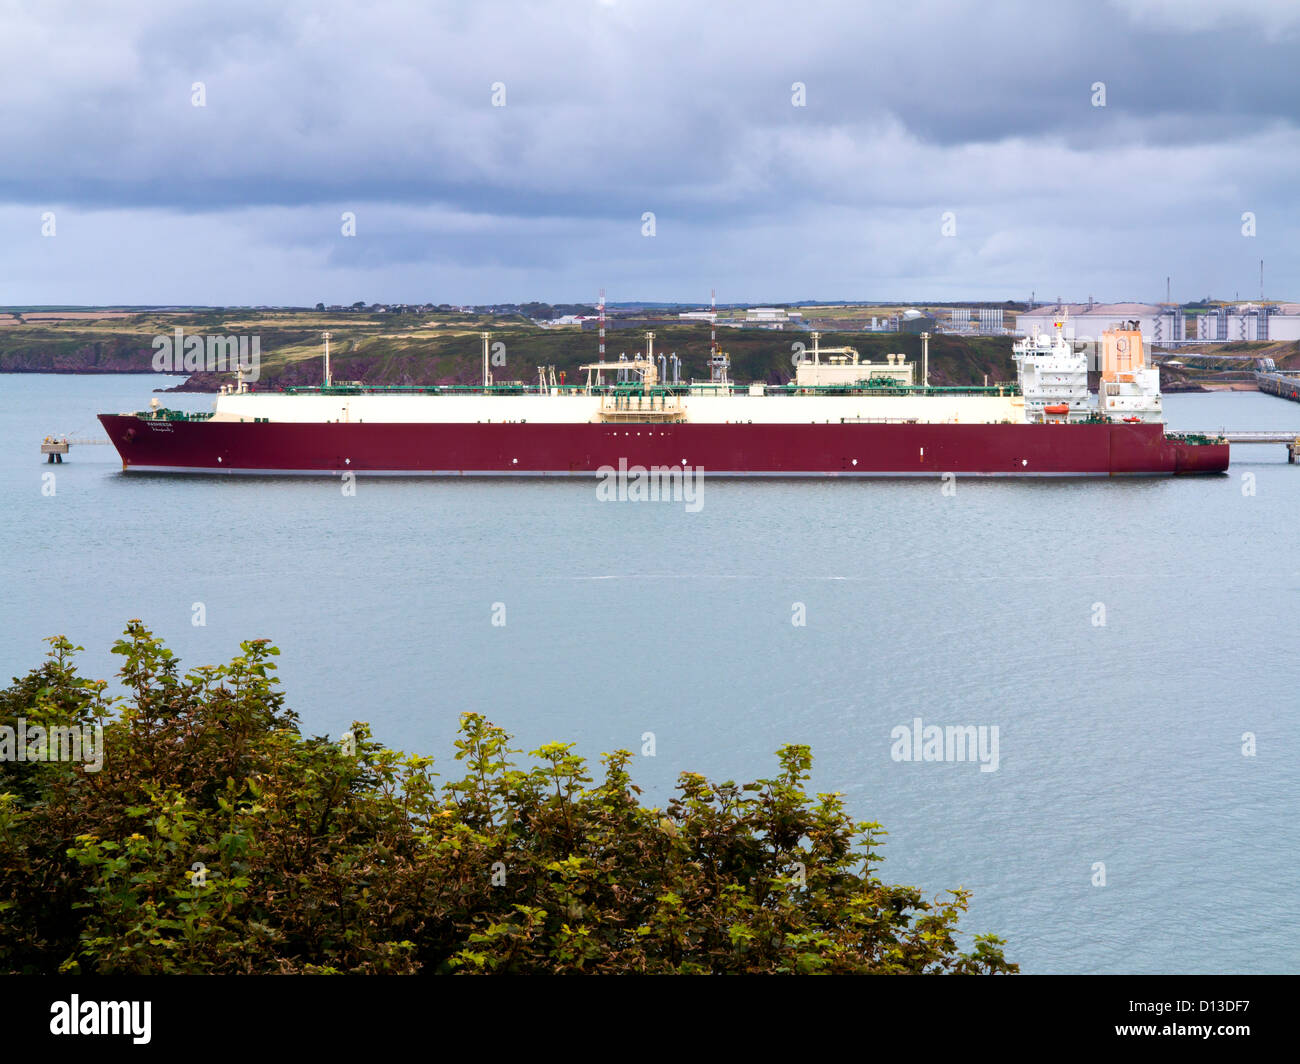 Qatargas LNG transport ship Rasheeda berthed at Milford Haven Wales UK used to transport liquid gas from Qatar launched 2010 Stock Photo